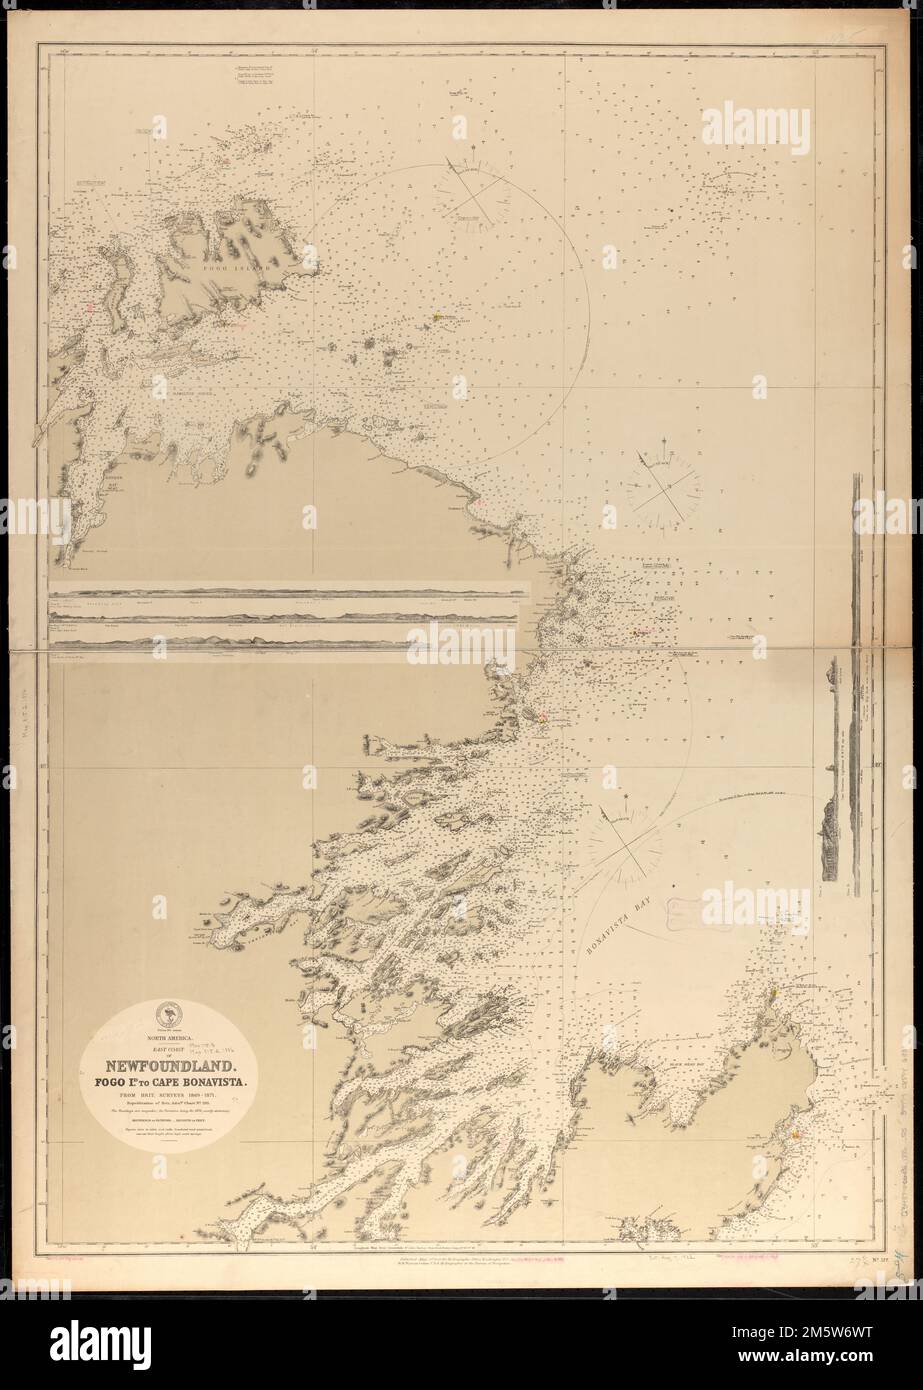 North America, east coast of Newfoundland, Fogo Id. to Cape Bonavista : from Brit. surveys 1869-1871 ; republication of Brit. Admty. chart no. 293. Relief shown by hachures and spot heights. Depths shown by soundings and isolines. Boston Public Library copy includes manuscript additions in red ink. Includes 5 coastal views. 'Cor. (54.VIII.79)(29.V.81).' 'Cor. (VIII.77.)(V.78.)(I.82)(IX.86).' 'Cor. (XII.74)(18-I.80.)(30-II.83).'.. Fogo Id. to Cape Bonavista. Fogo Id. to Cape Bonavista, Canada  , Newfoundland and Labrador  ,province   , Bonavista Bay Canada  , Newfoundland and Labrador  ,provinc Stock Photo